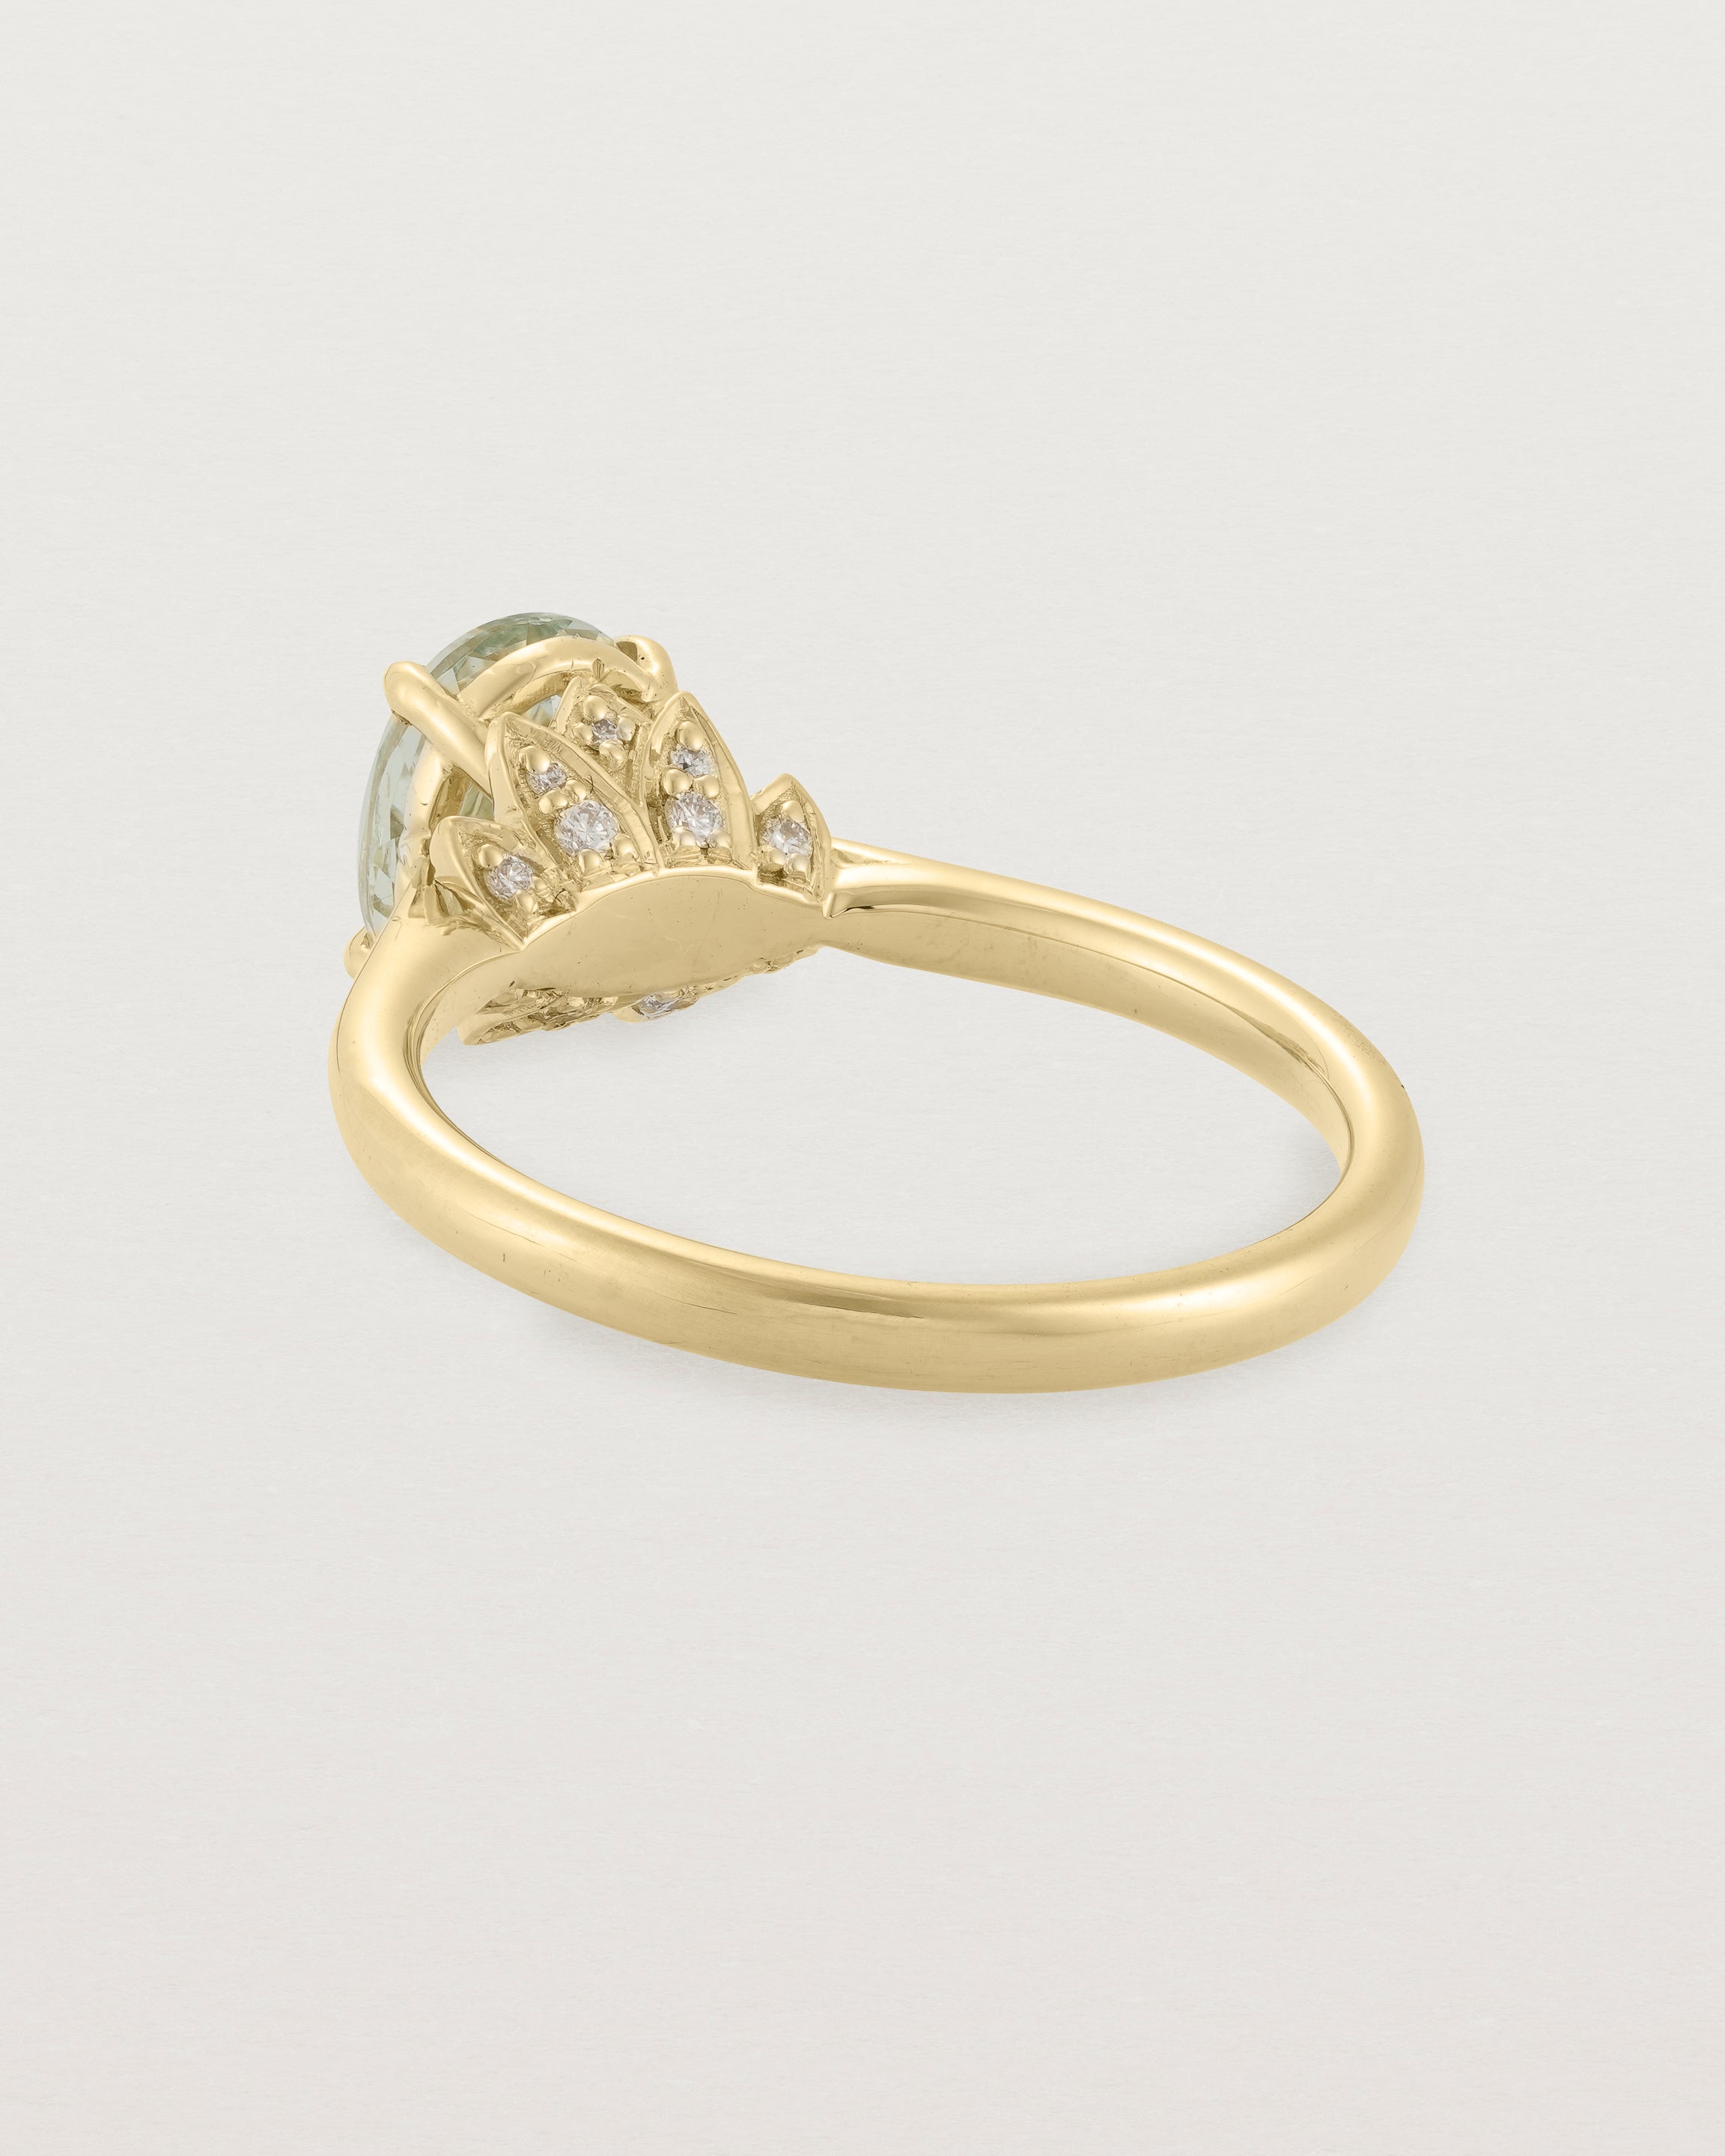 Back view of the Kalina Oval Solitaire | Green Amethyst | Yellow Gold.